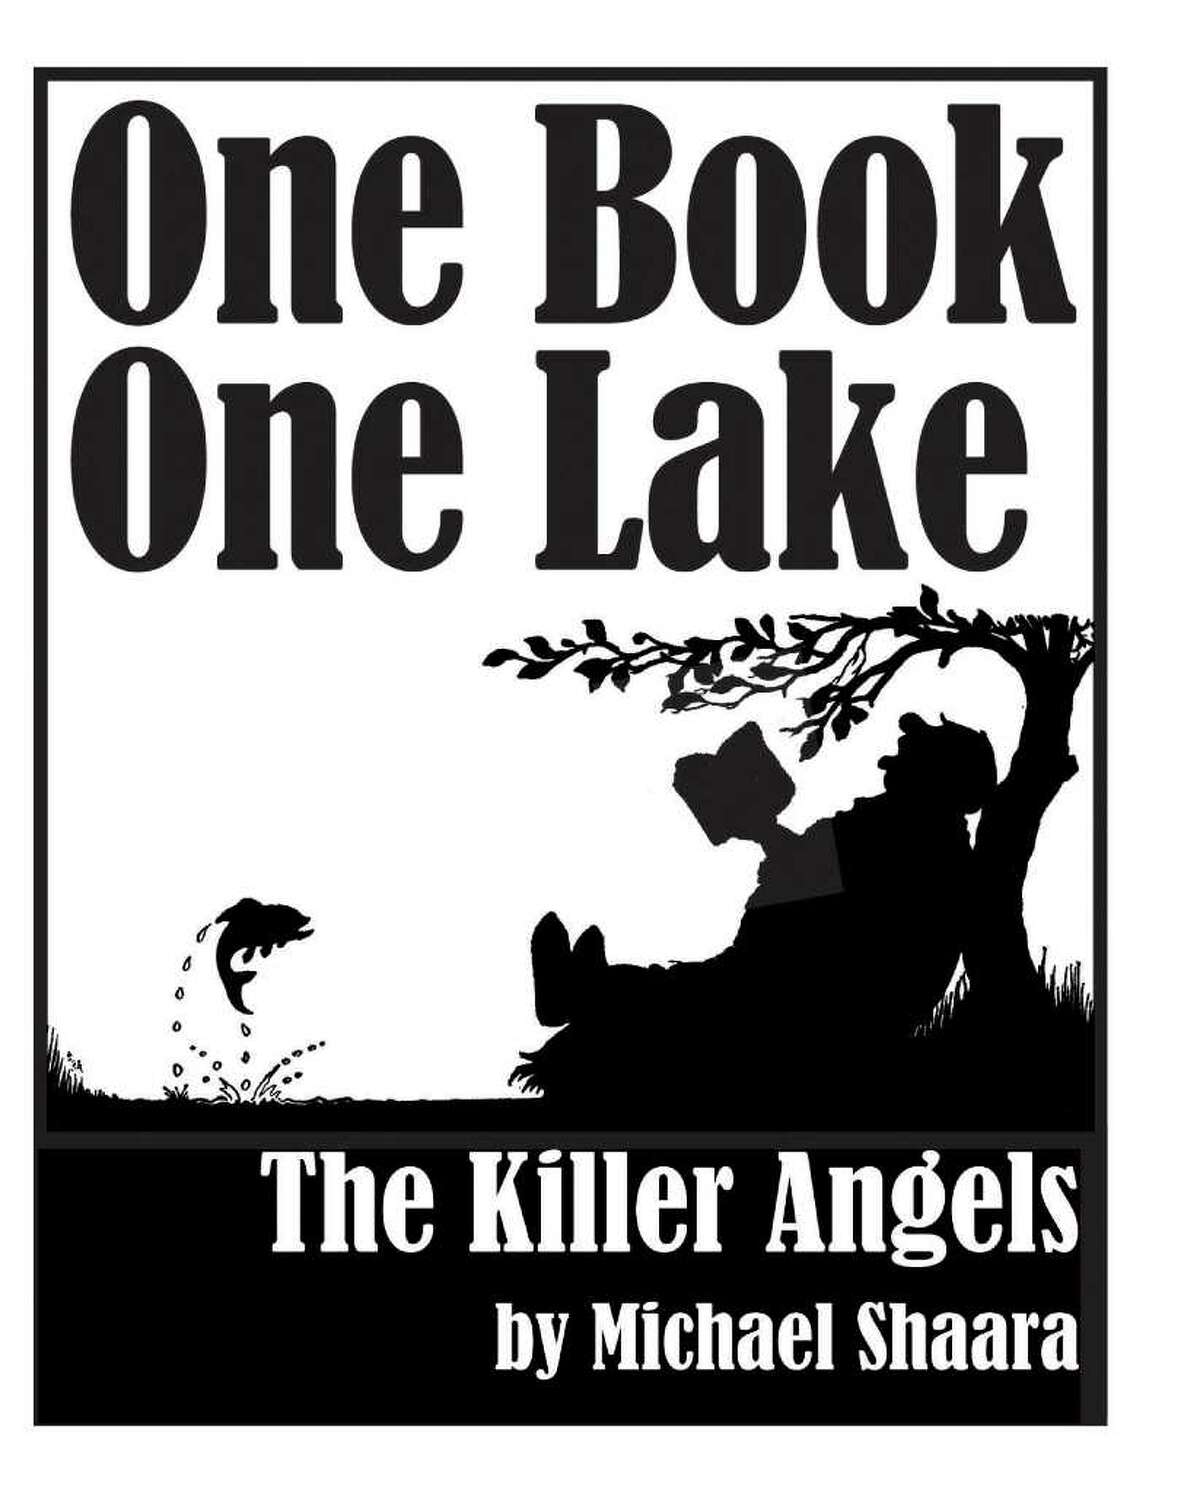 The One Book One Lake program is highlighting the 150th anniversary of the start of the Civil War with its selection of "The Killer Angels" as the book for this year's program. Events related to the theme, including book discussions, film screenings, author talks and social events, will take place throughout July.